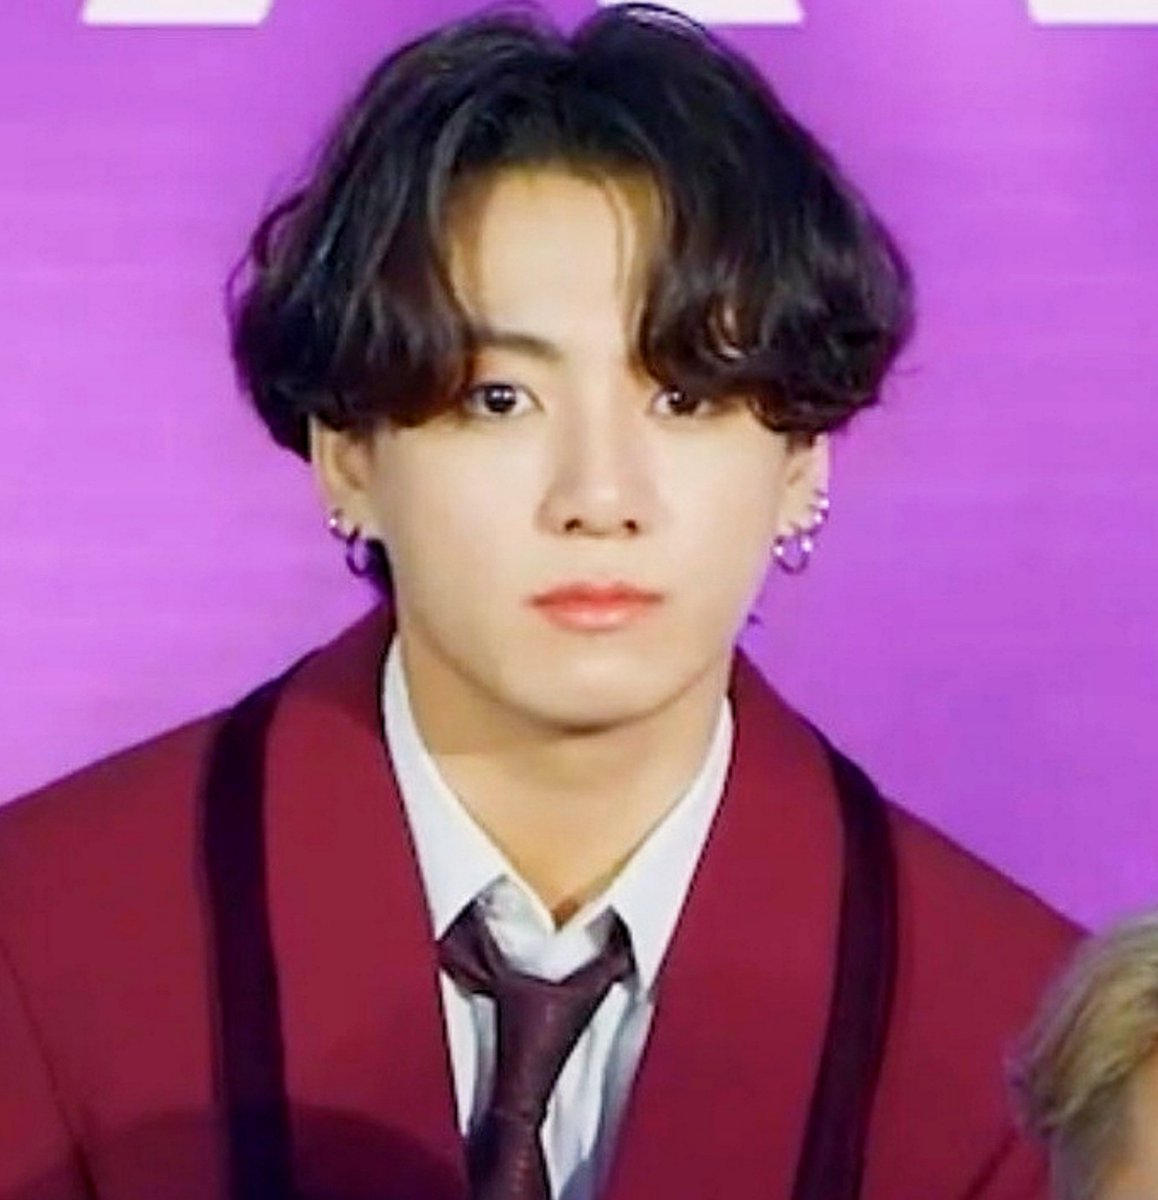 jungkook wearing red and black suit｜TikTok Search